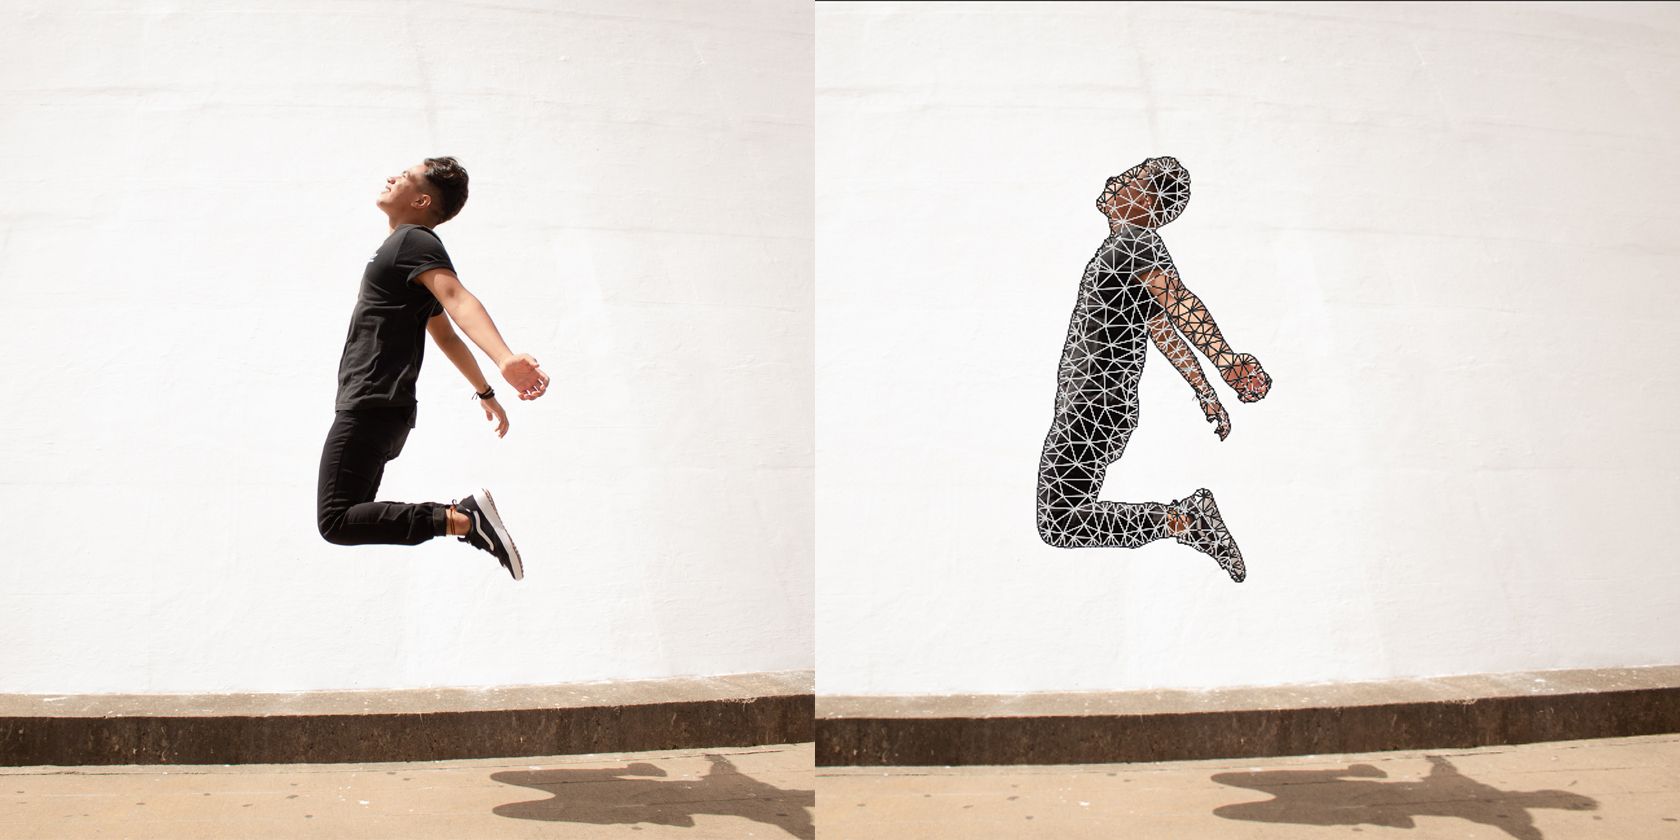 Side by side comparison images of a man jumping midair. Photo on right has puppet warp mesh over the subject.